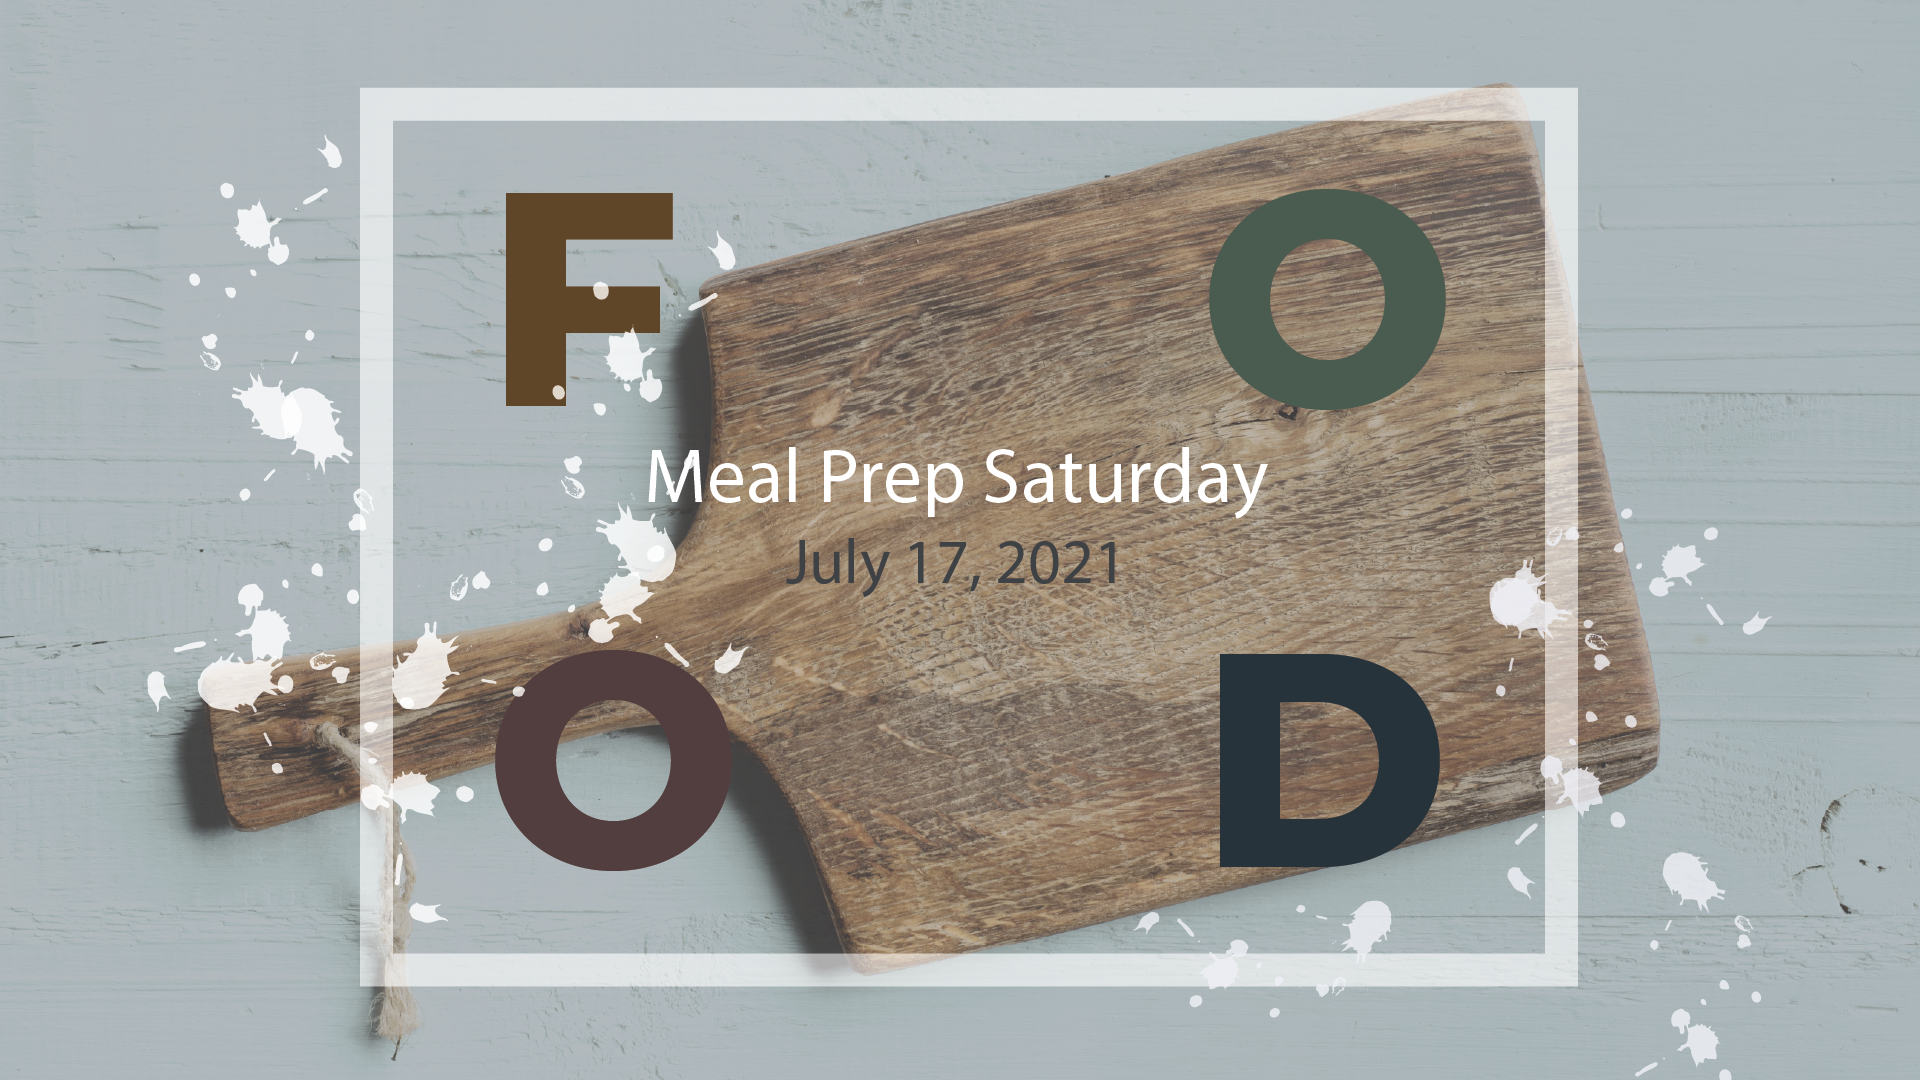 New Mercies (formerly affiliated with Safe Families) Meal Prep Saturday